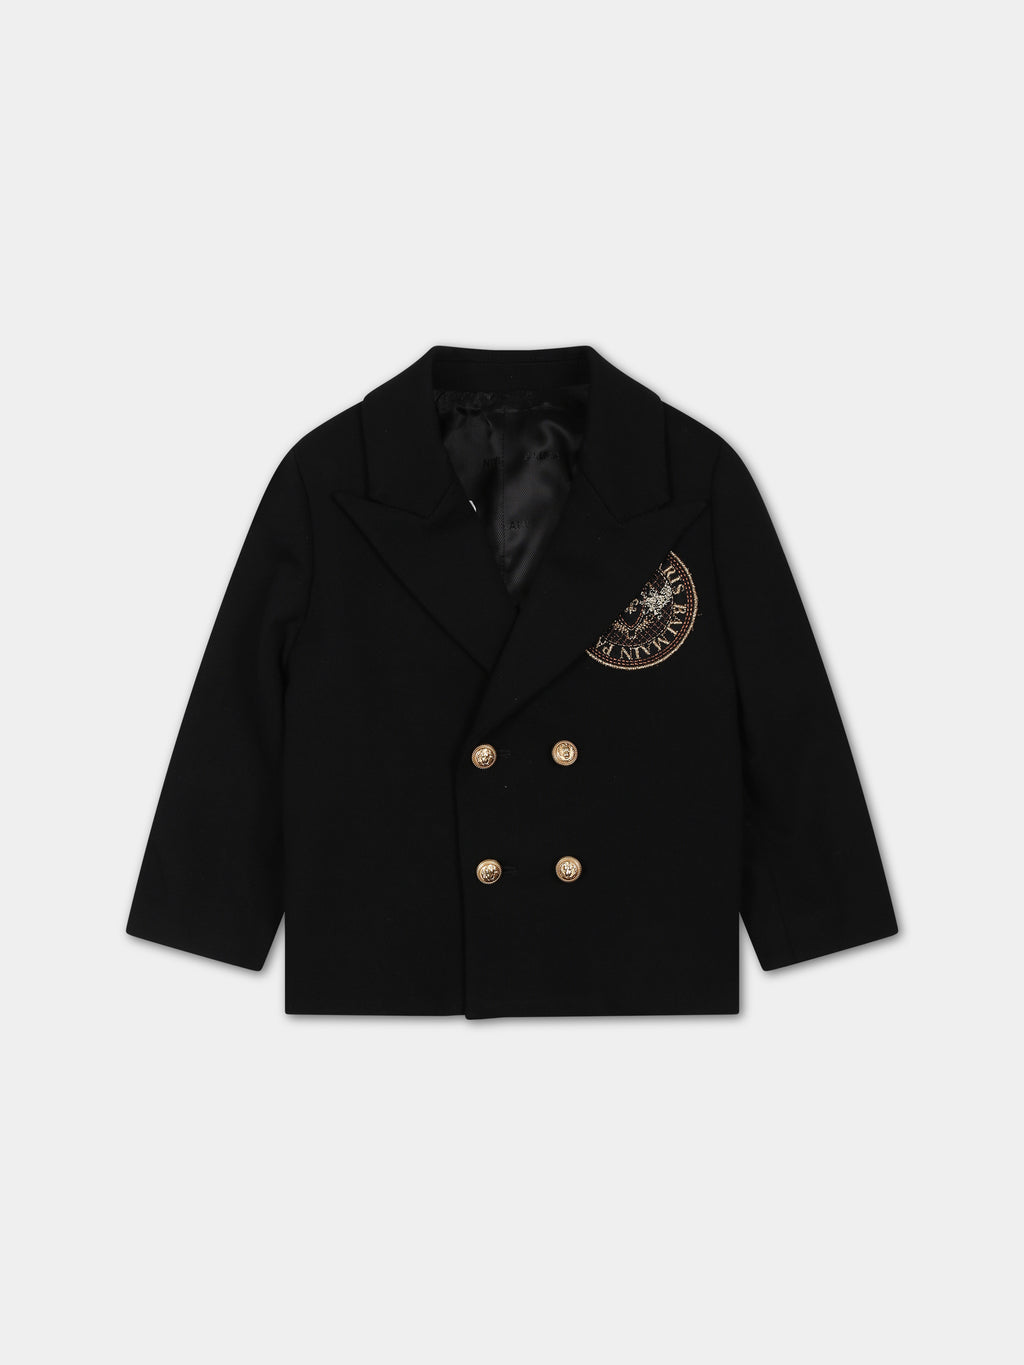 Black jacket fro baby boy with logo